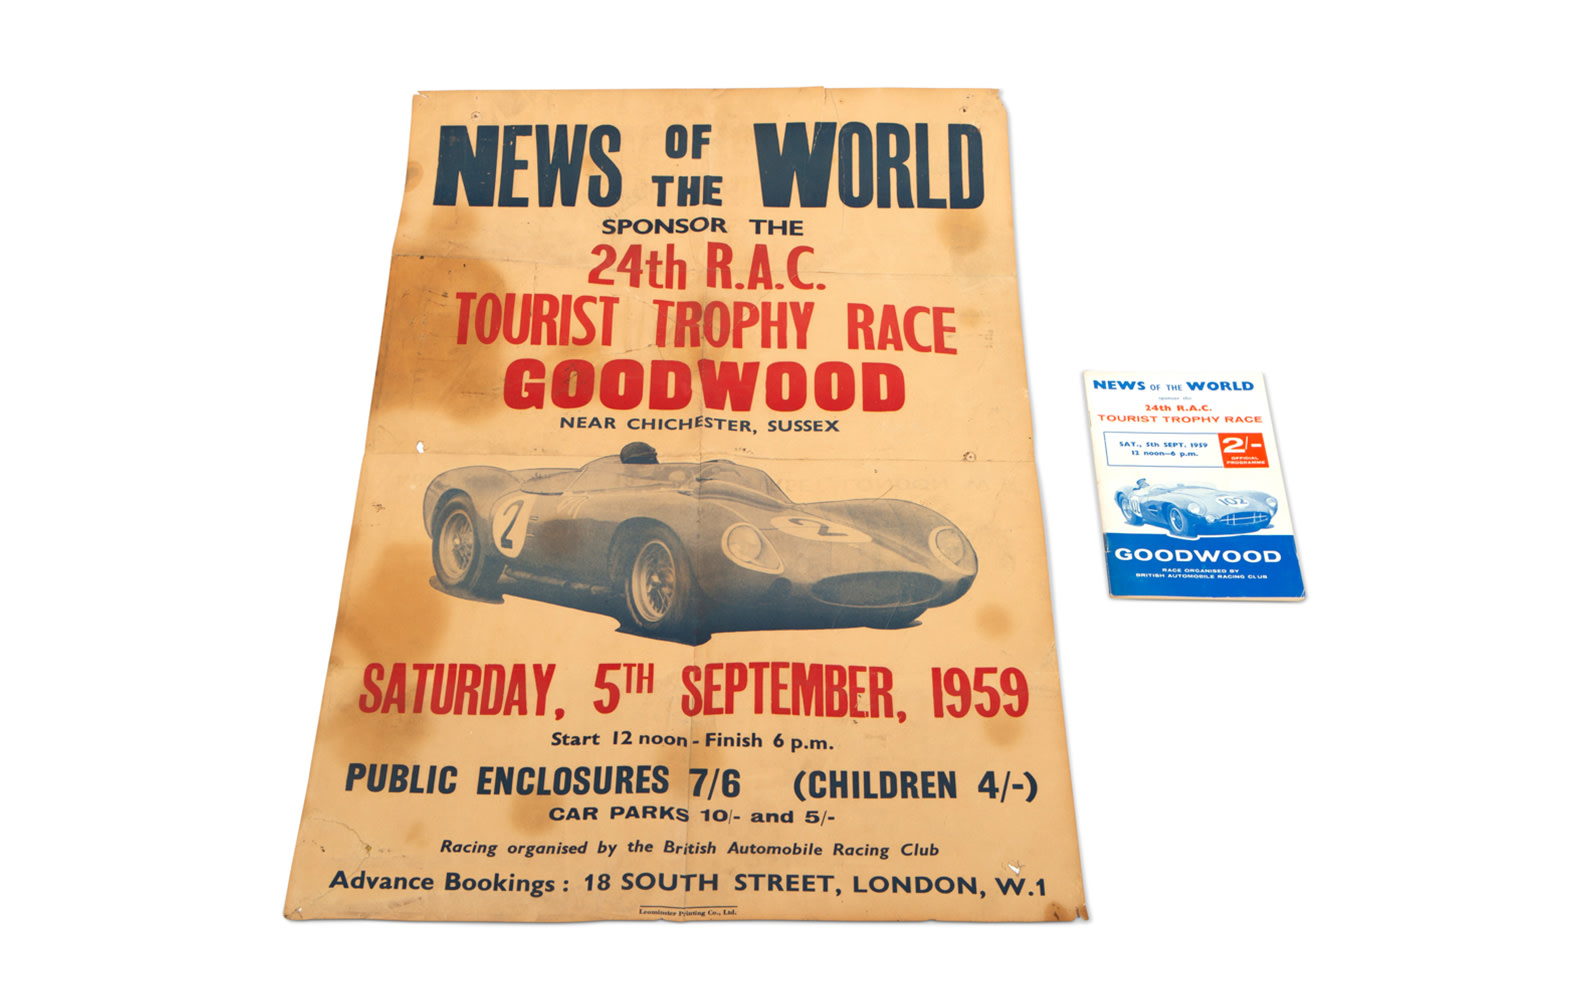 Official Promotional Poster and Program for Tourist Trophy Race at Goodwood, September 1959